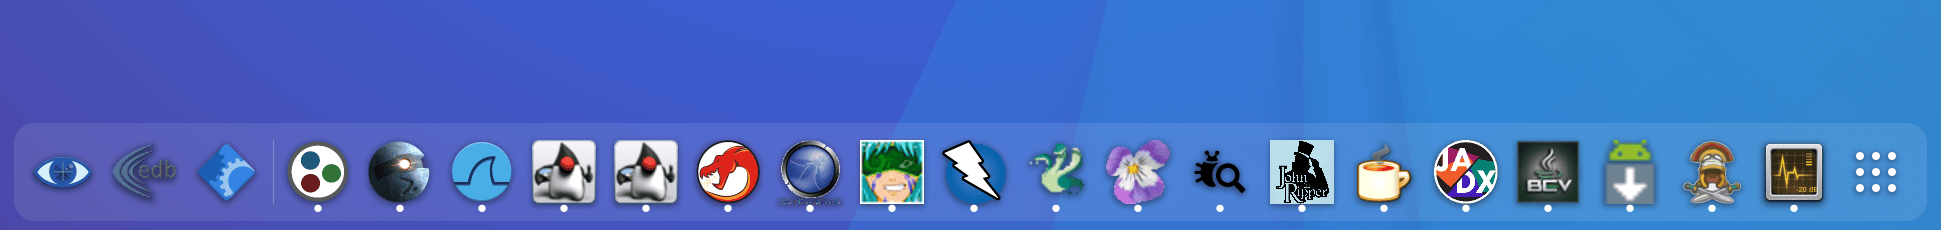 running app icons old